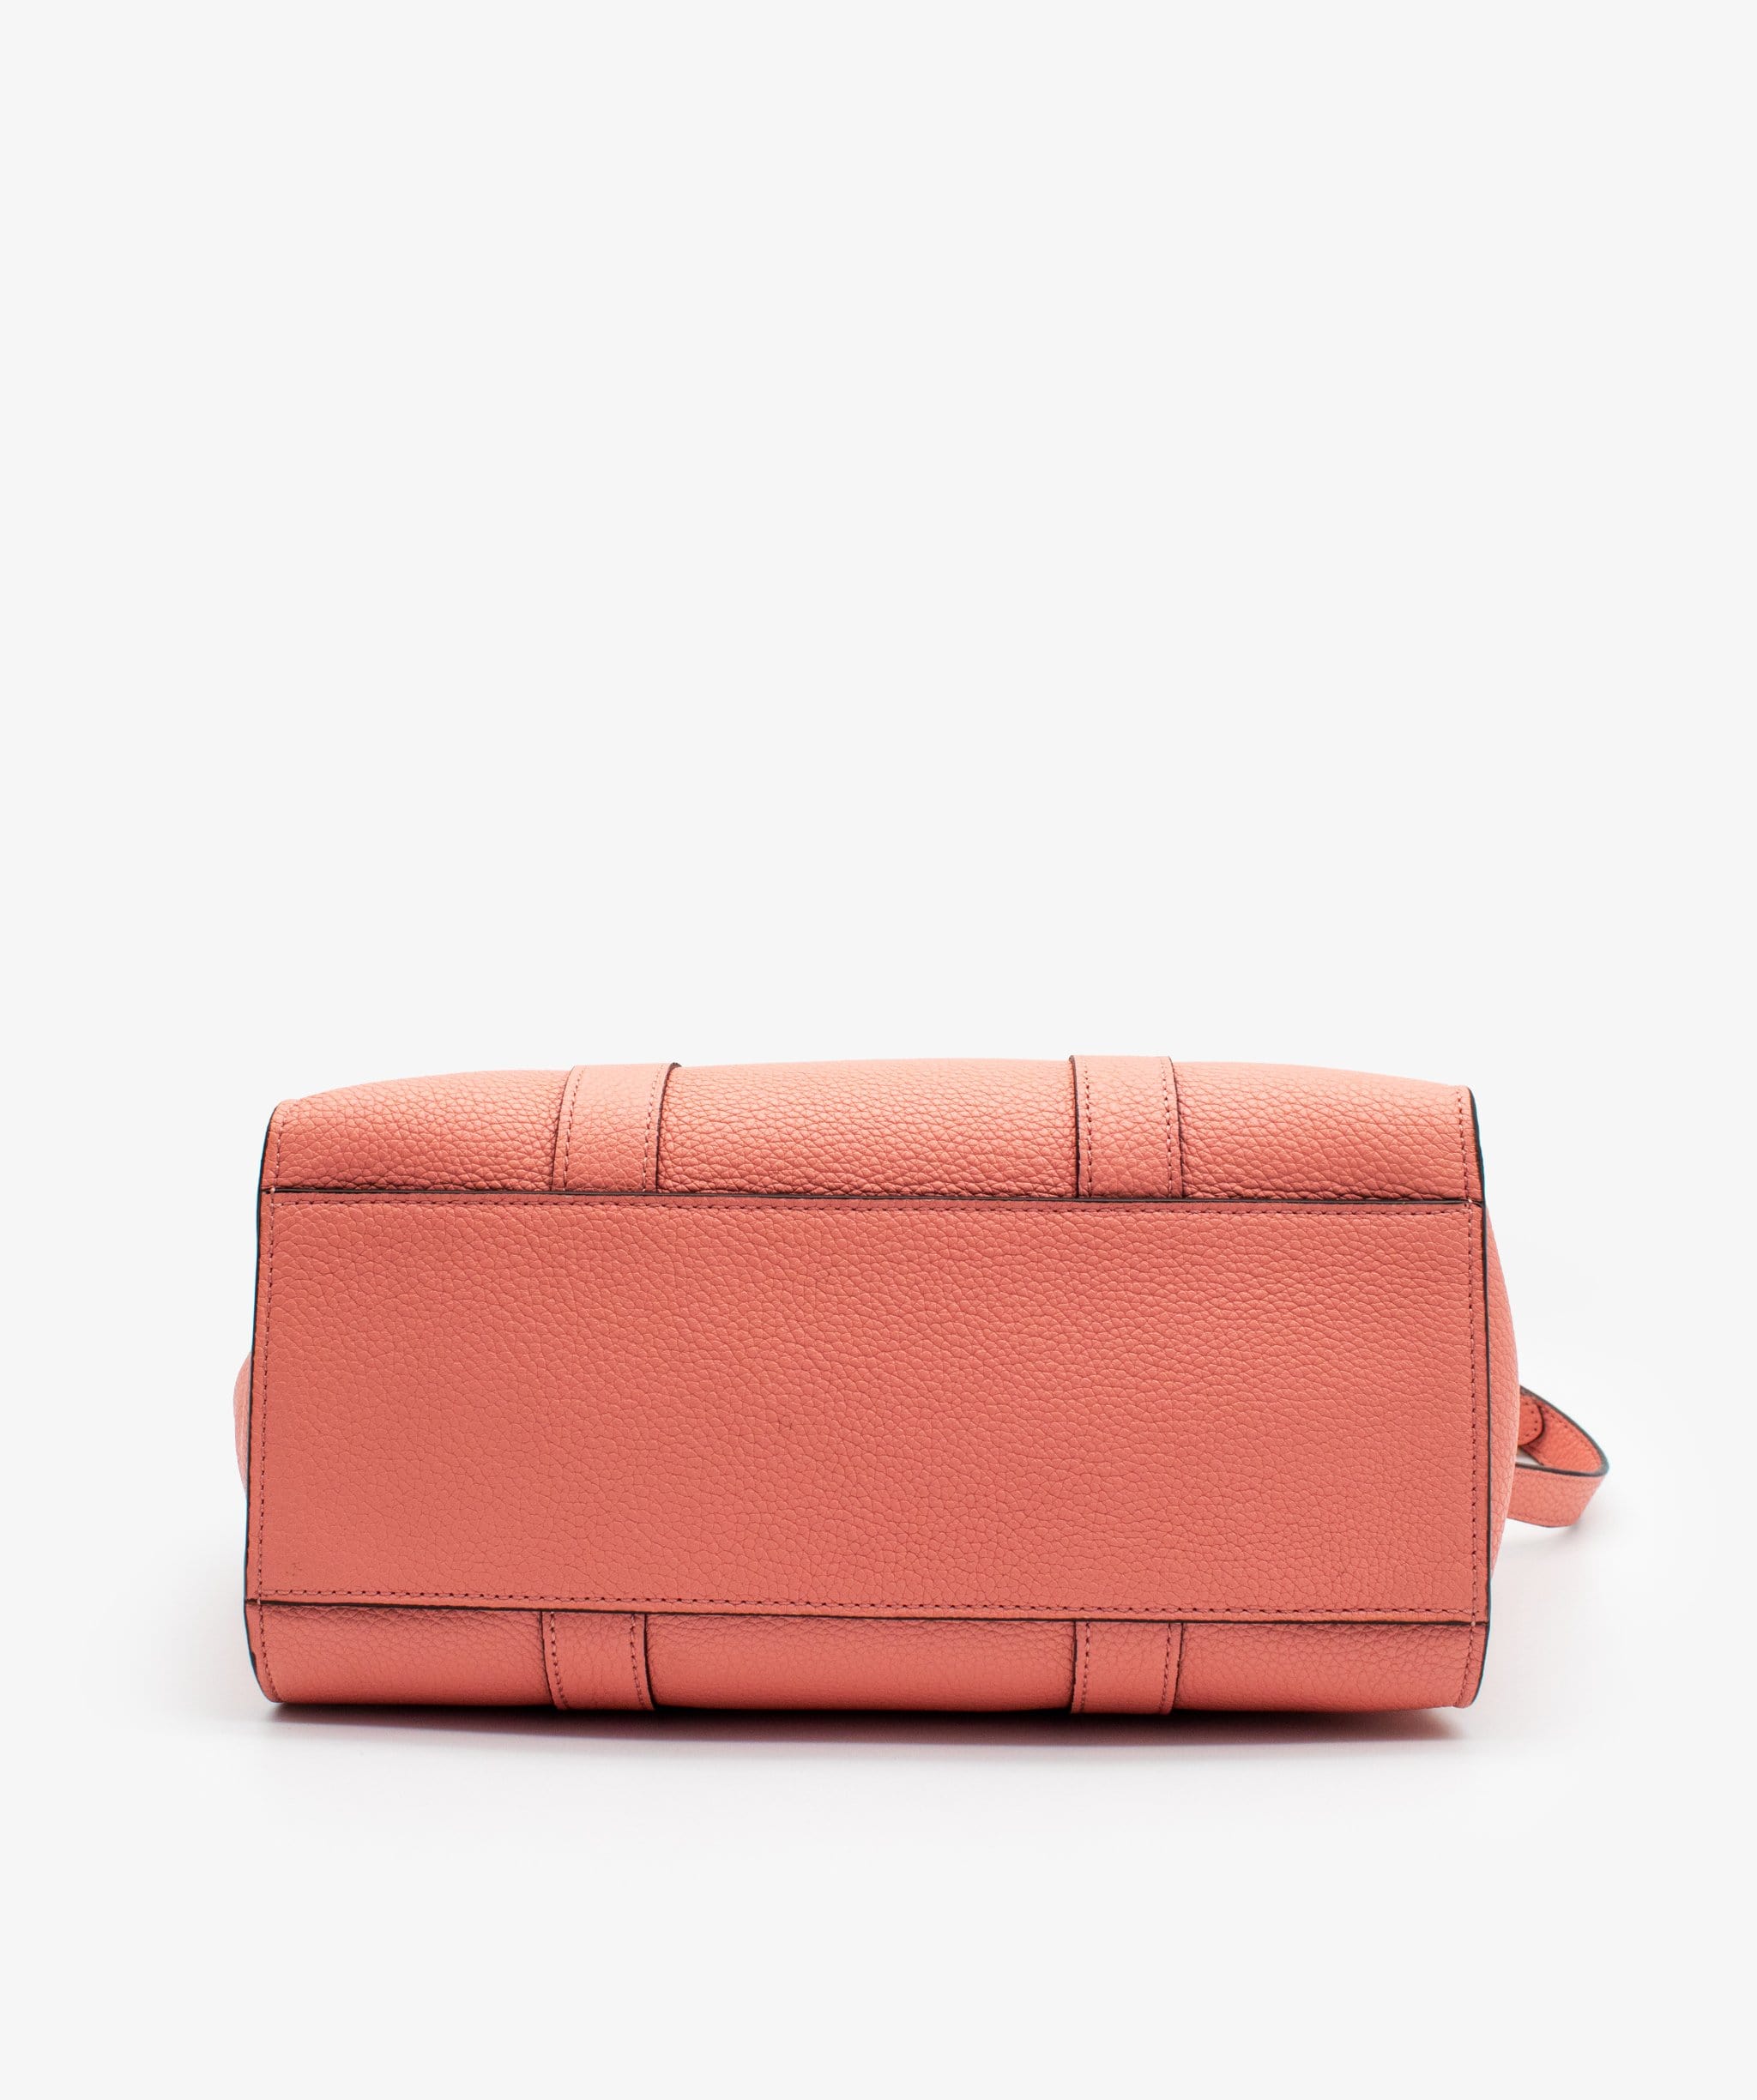 Mulberry Mulberry Pink Bayswater Bag